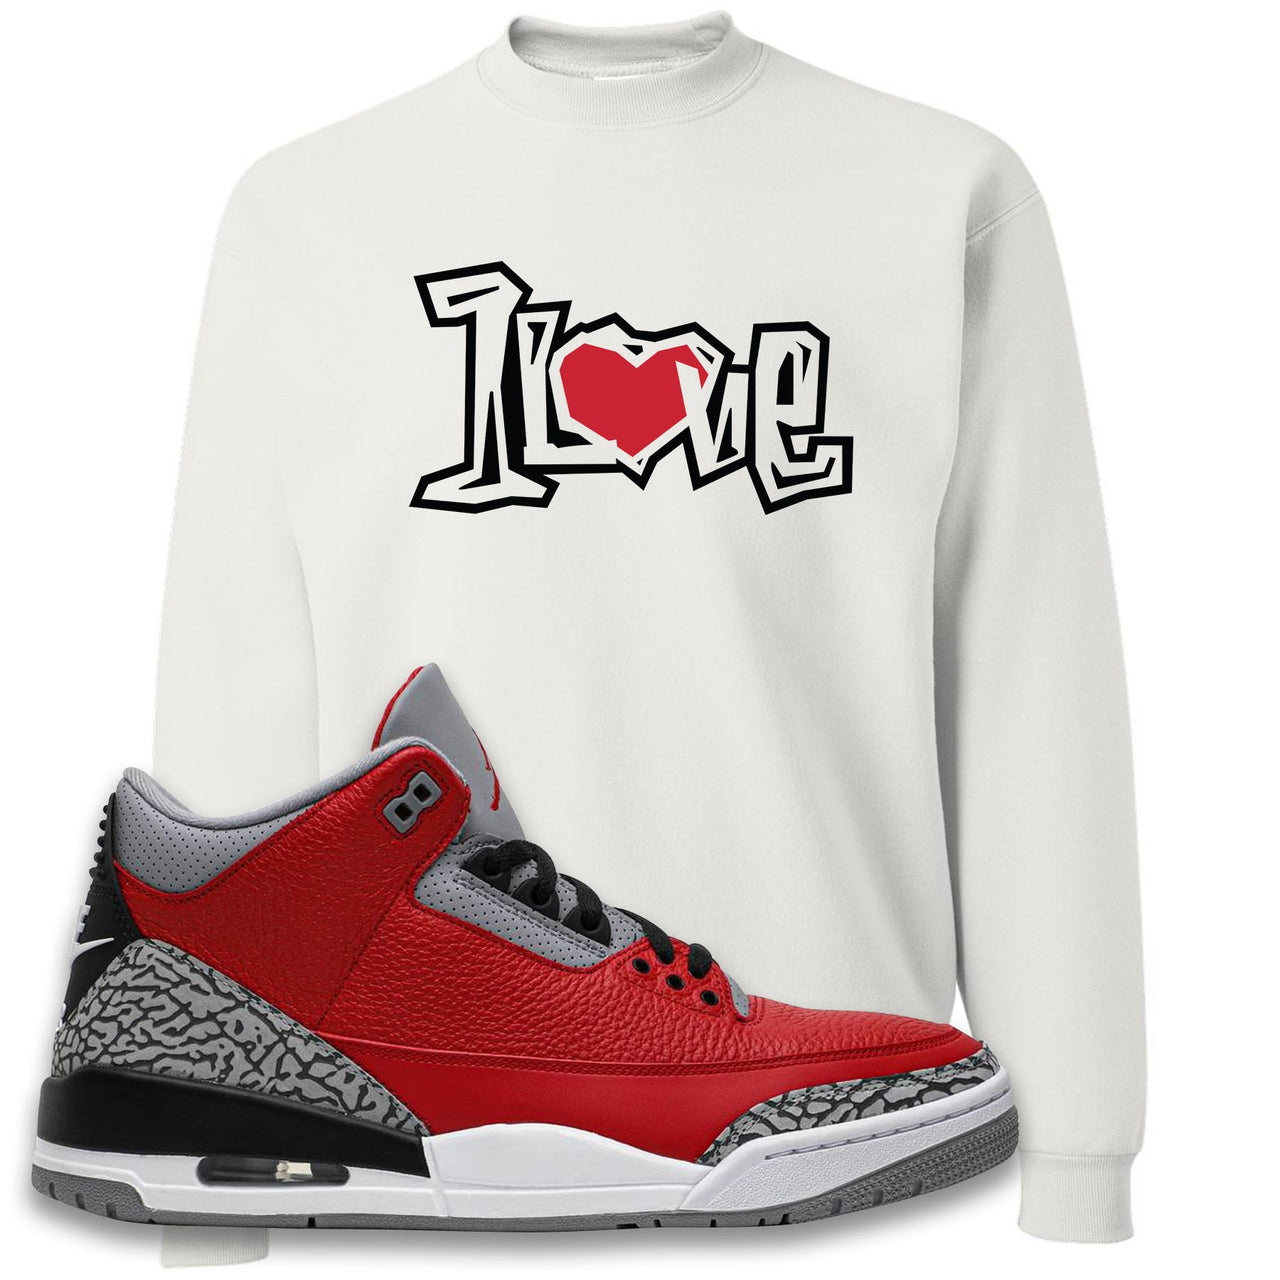 Chicago Exclusive Jordan 3 Red Cement Sneaker White Crewneck Sweatshirt | Crewneck to match Jordan 3 All Star Red Cement Shoes | 1 Love